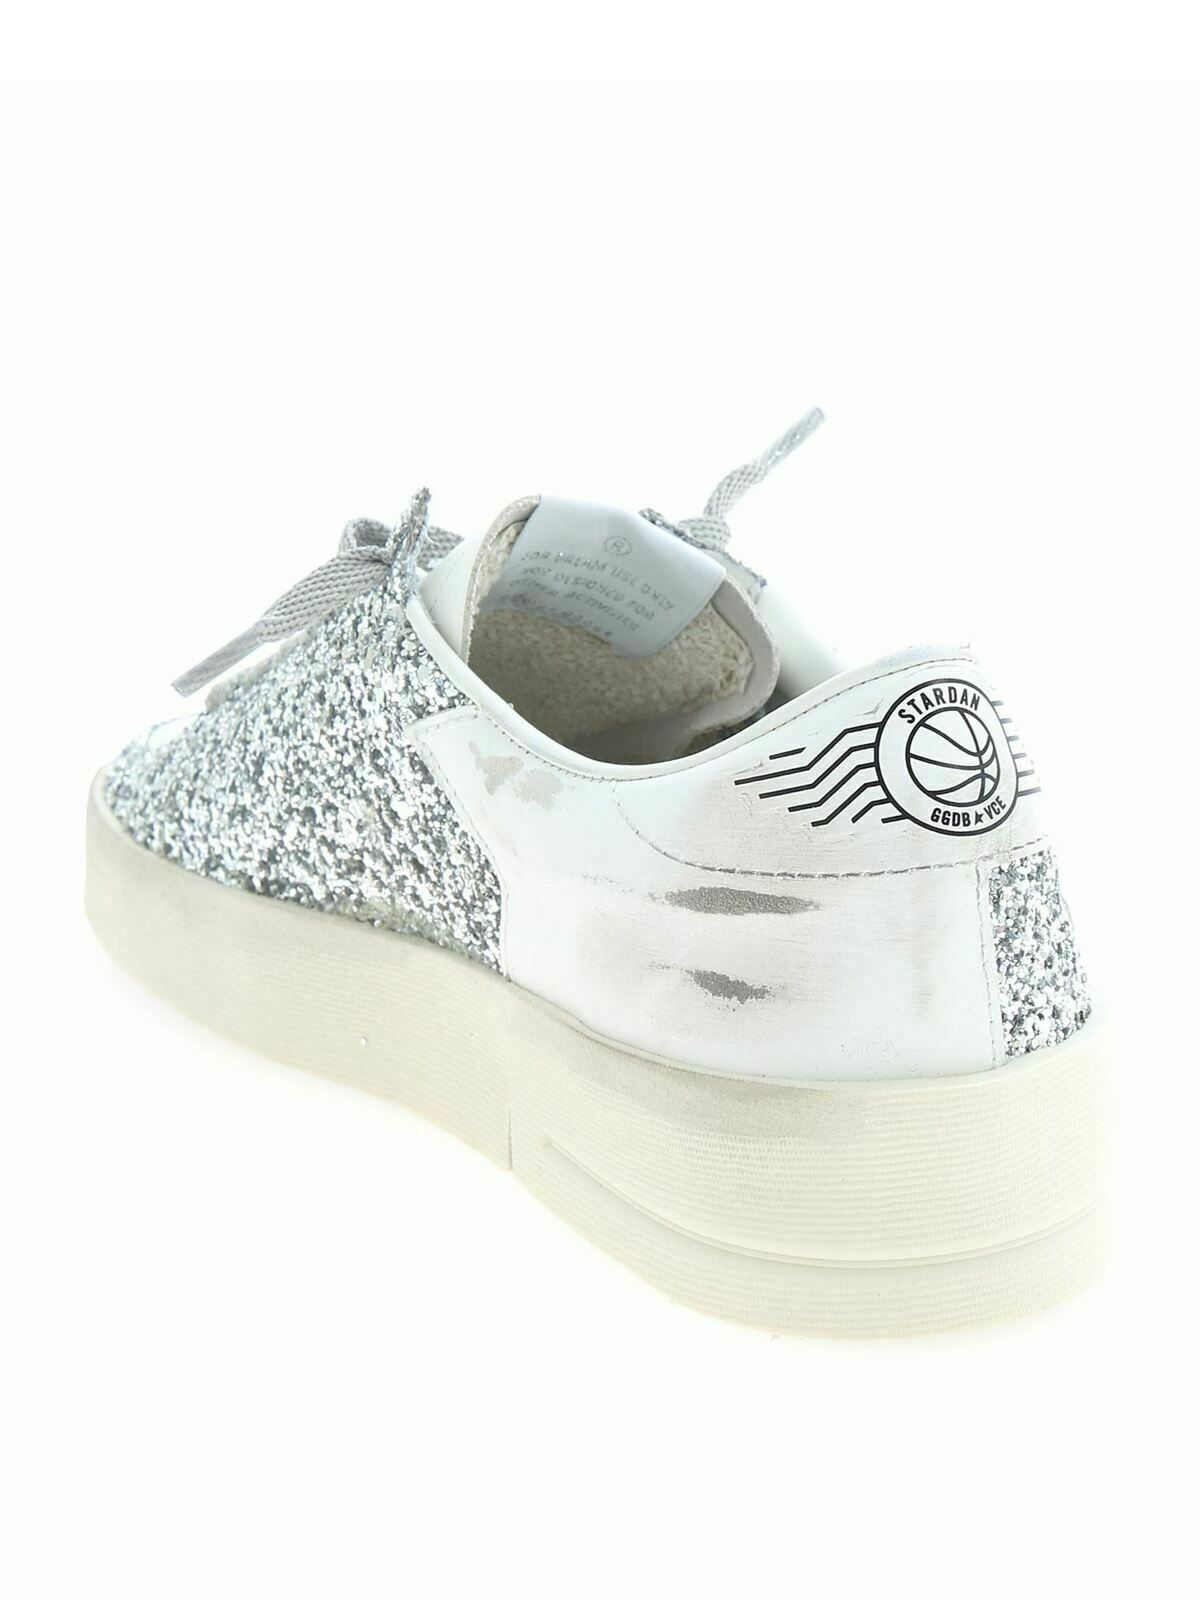 Shop Golden Goose Stardan Sneakers In White And Silver Glitter In Plata